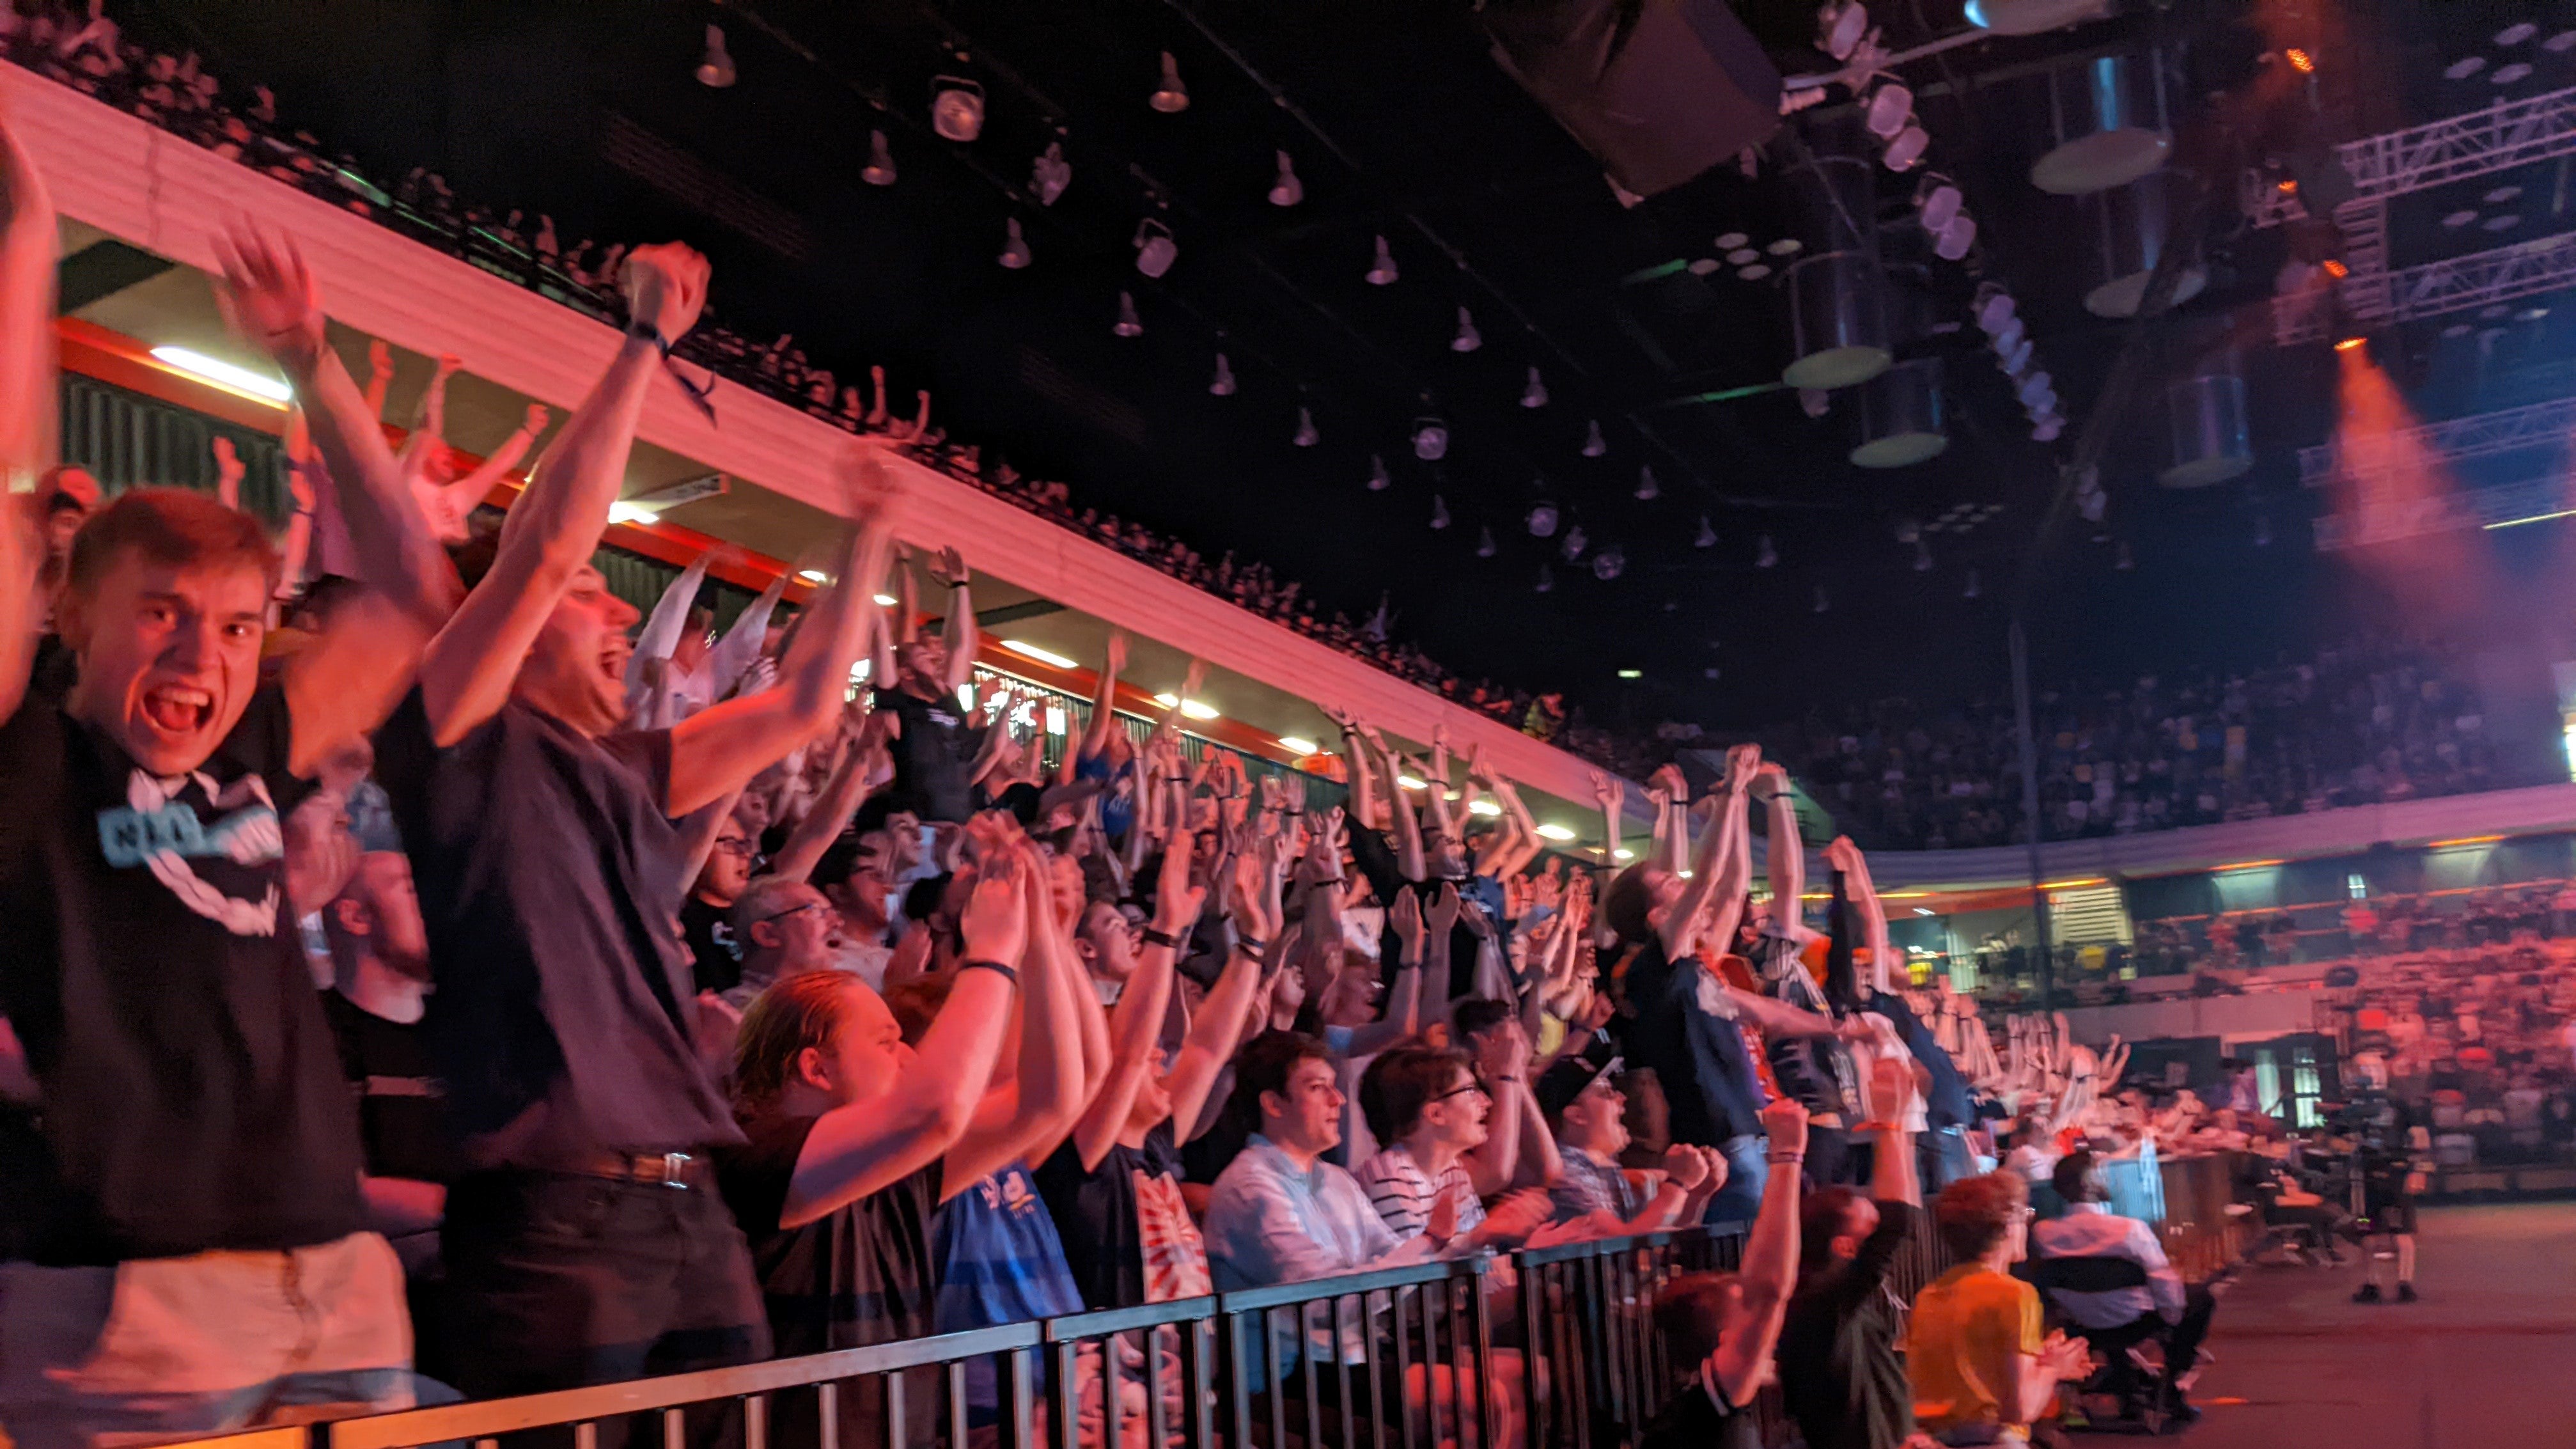 Header image of Section 104 from the Copper Box, London RLCS Spring Major 2022